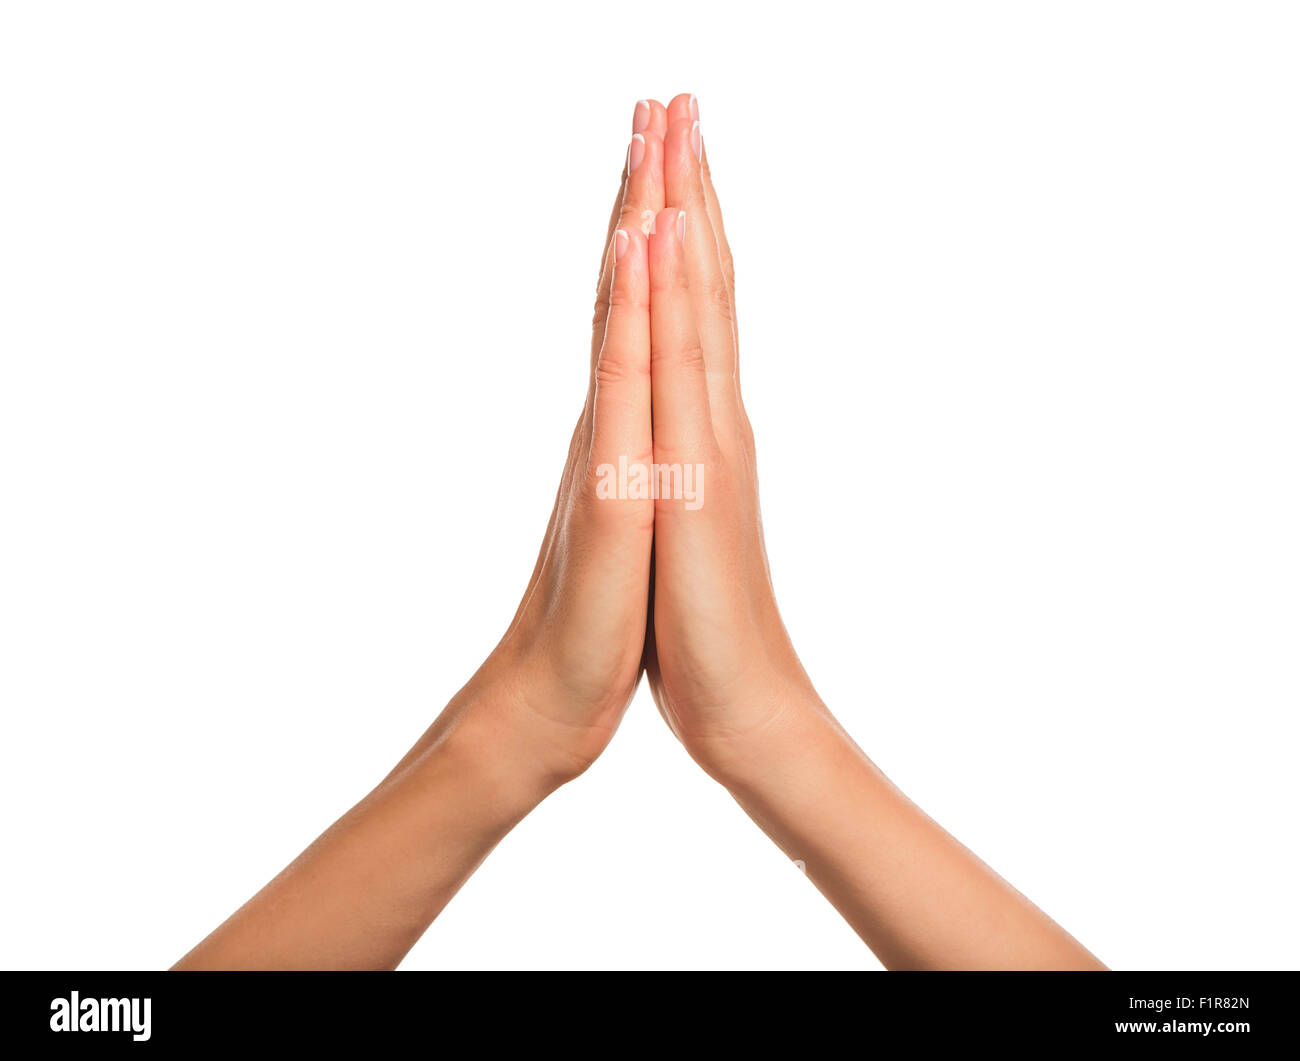 Praying hands of a woman. Stock Photo